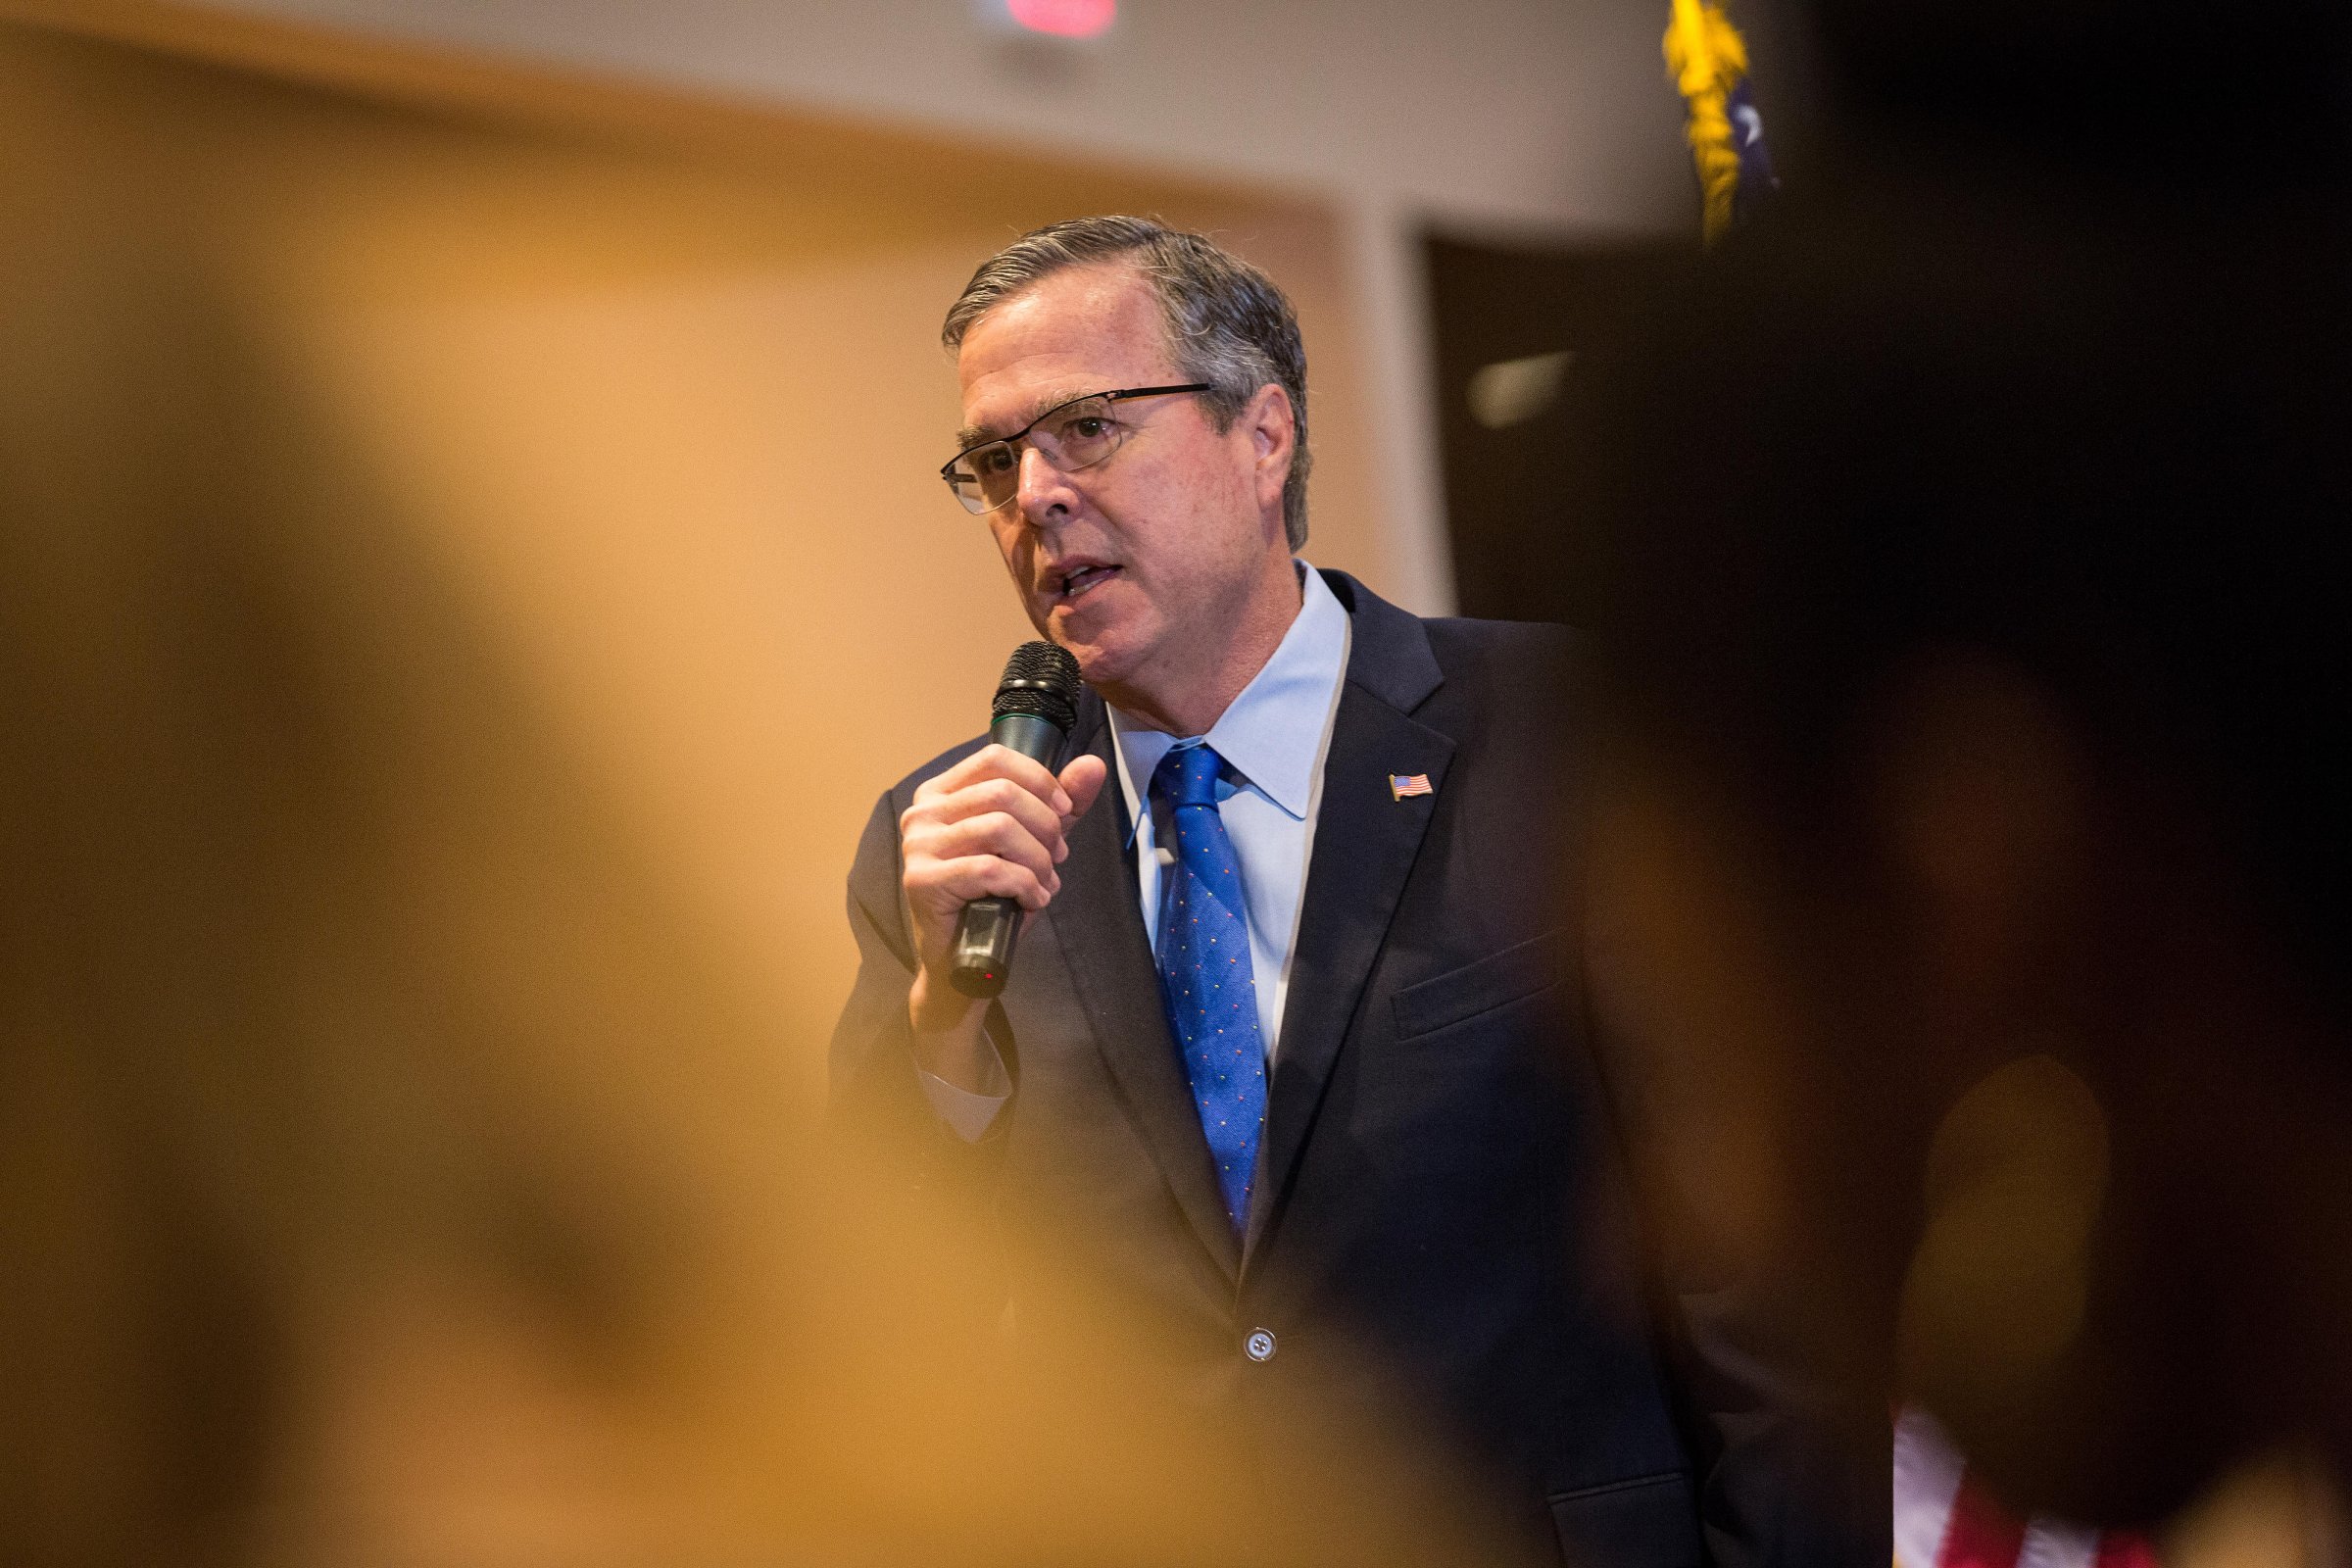 Former Florida Governor and potential Republican presidential candidate Jeb Bush speaks to supporters at an early morning GOP breakfast event in Myrtle Beach, South Carolina, on March 18, 2015.